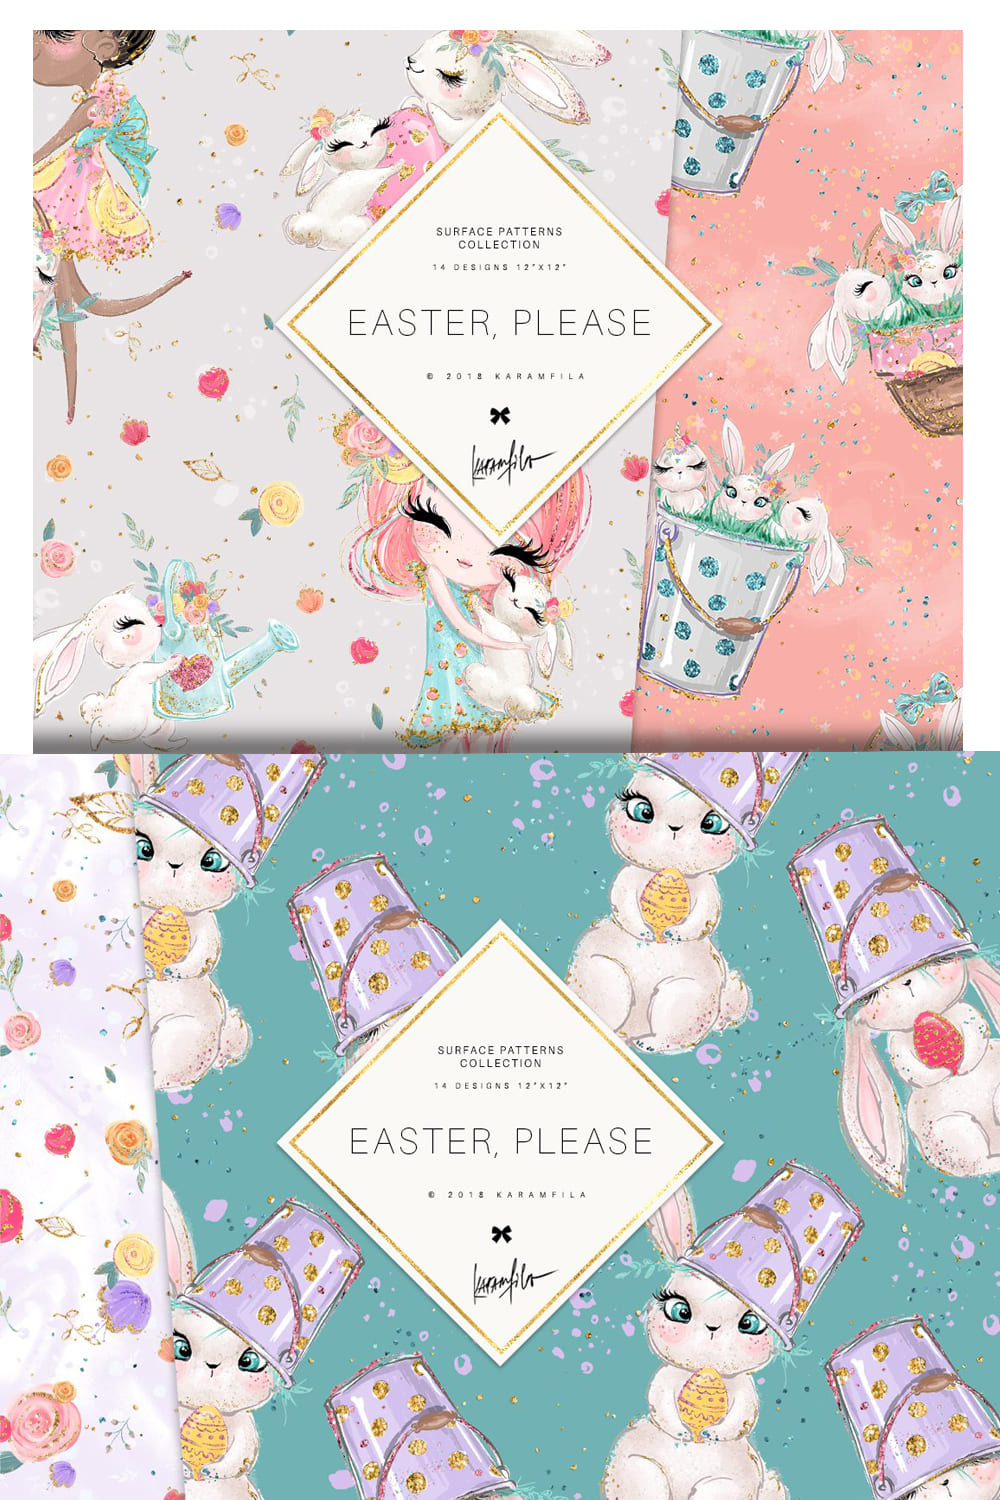 12 Easter Seamless Patterns.